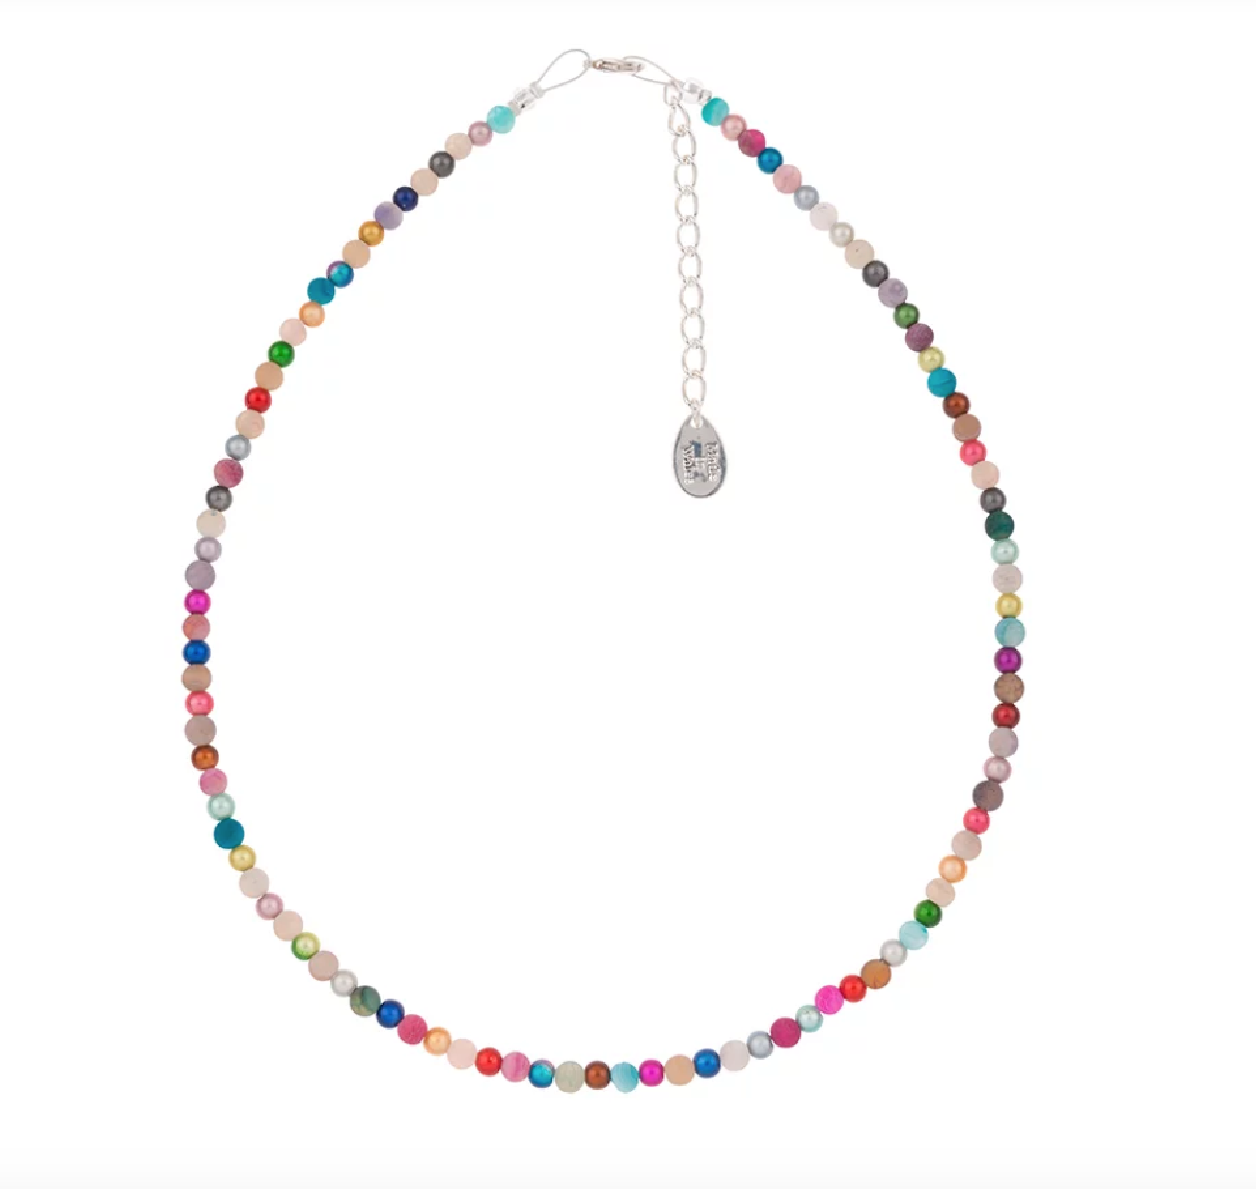 Carrie Elspeth Rainbow Miracle & Agate Full Necklace Pearl Necklace - Multi